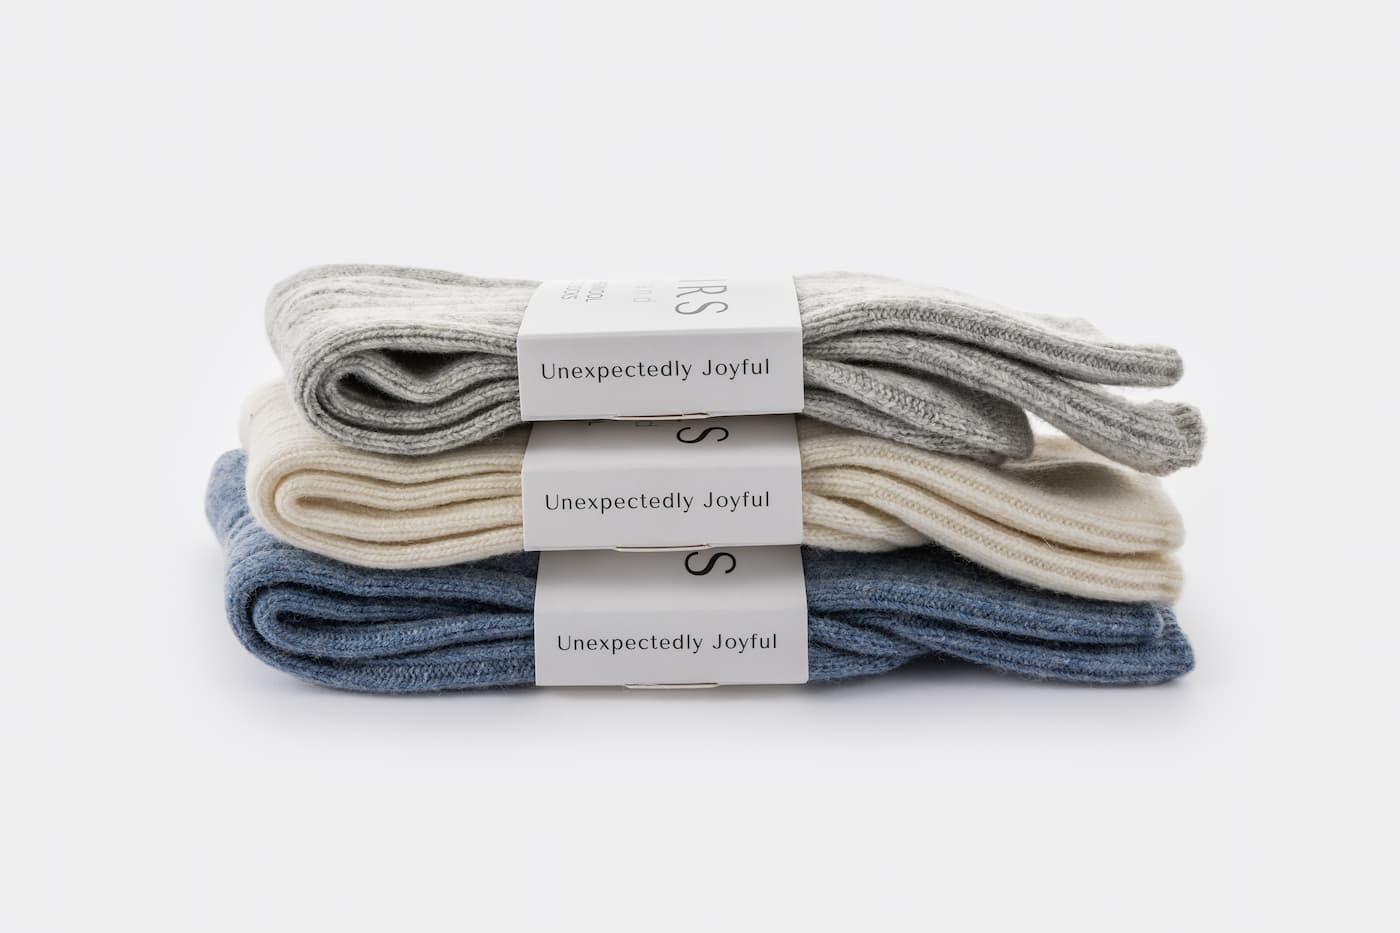 Lambswool Bed Sock Collection